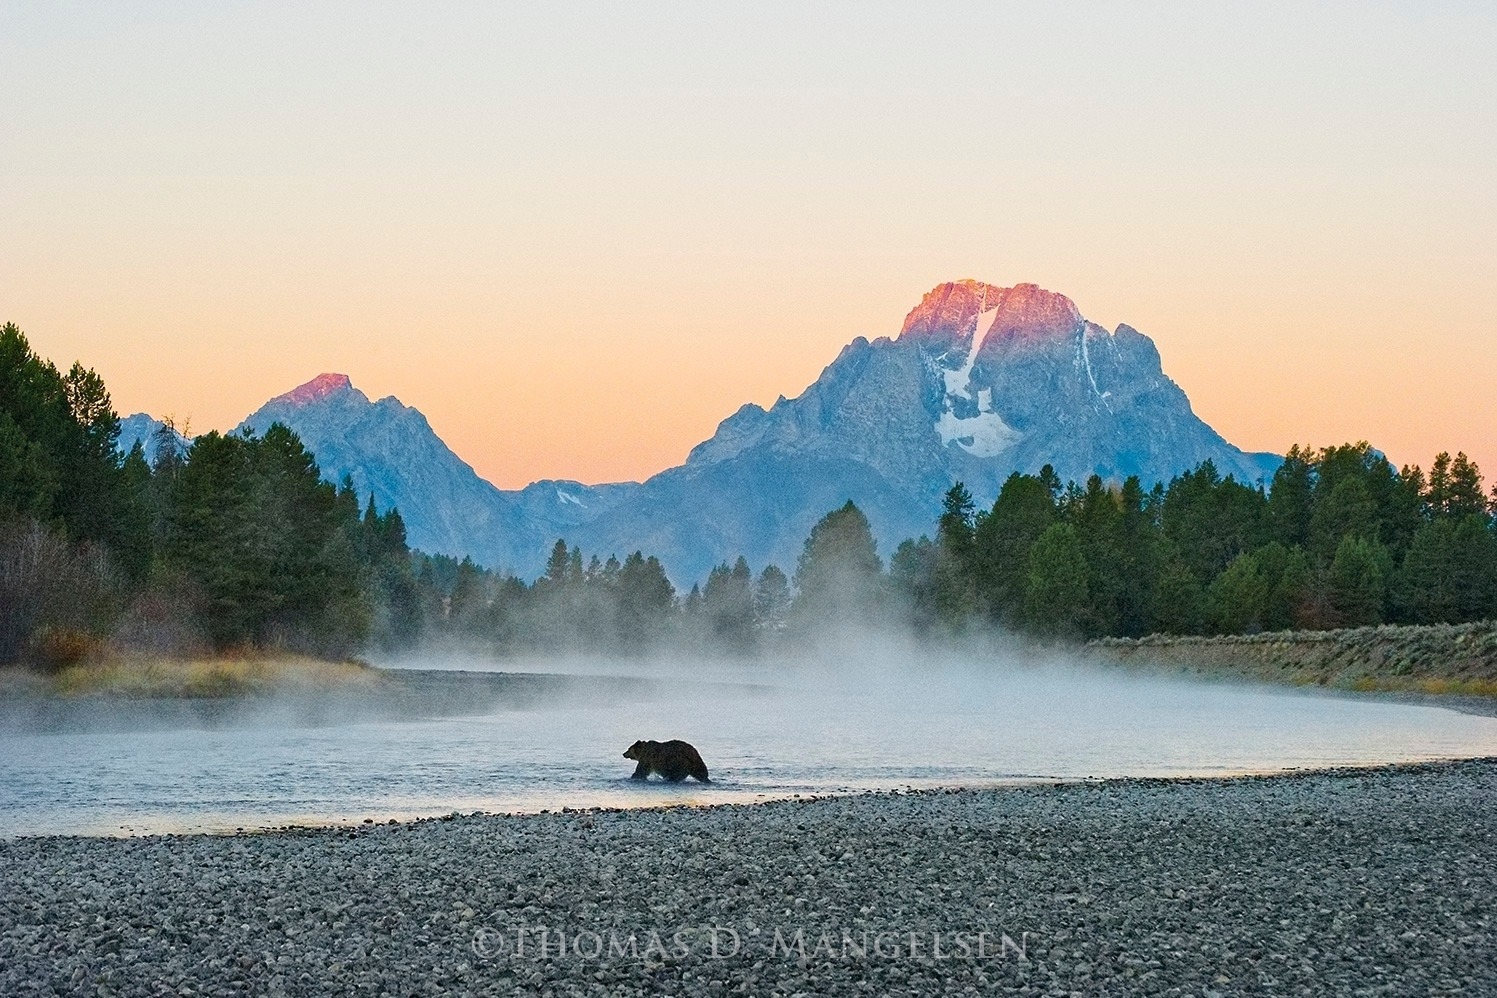 In "First Light—Grizzly," famed grizzly mother 399 wades the Snake River in Mangelsen's home valley of Jackson Hole with Mount Moran, one of the iconic Teton Peaks, rising in the background.  Photograph courtesy Thomas D. Mangelsen